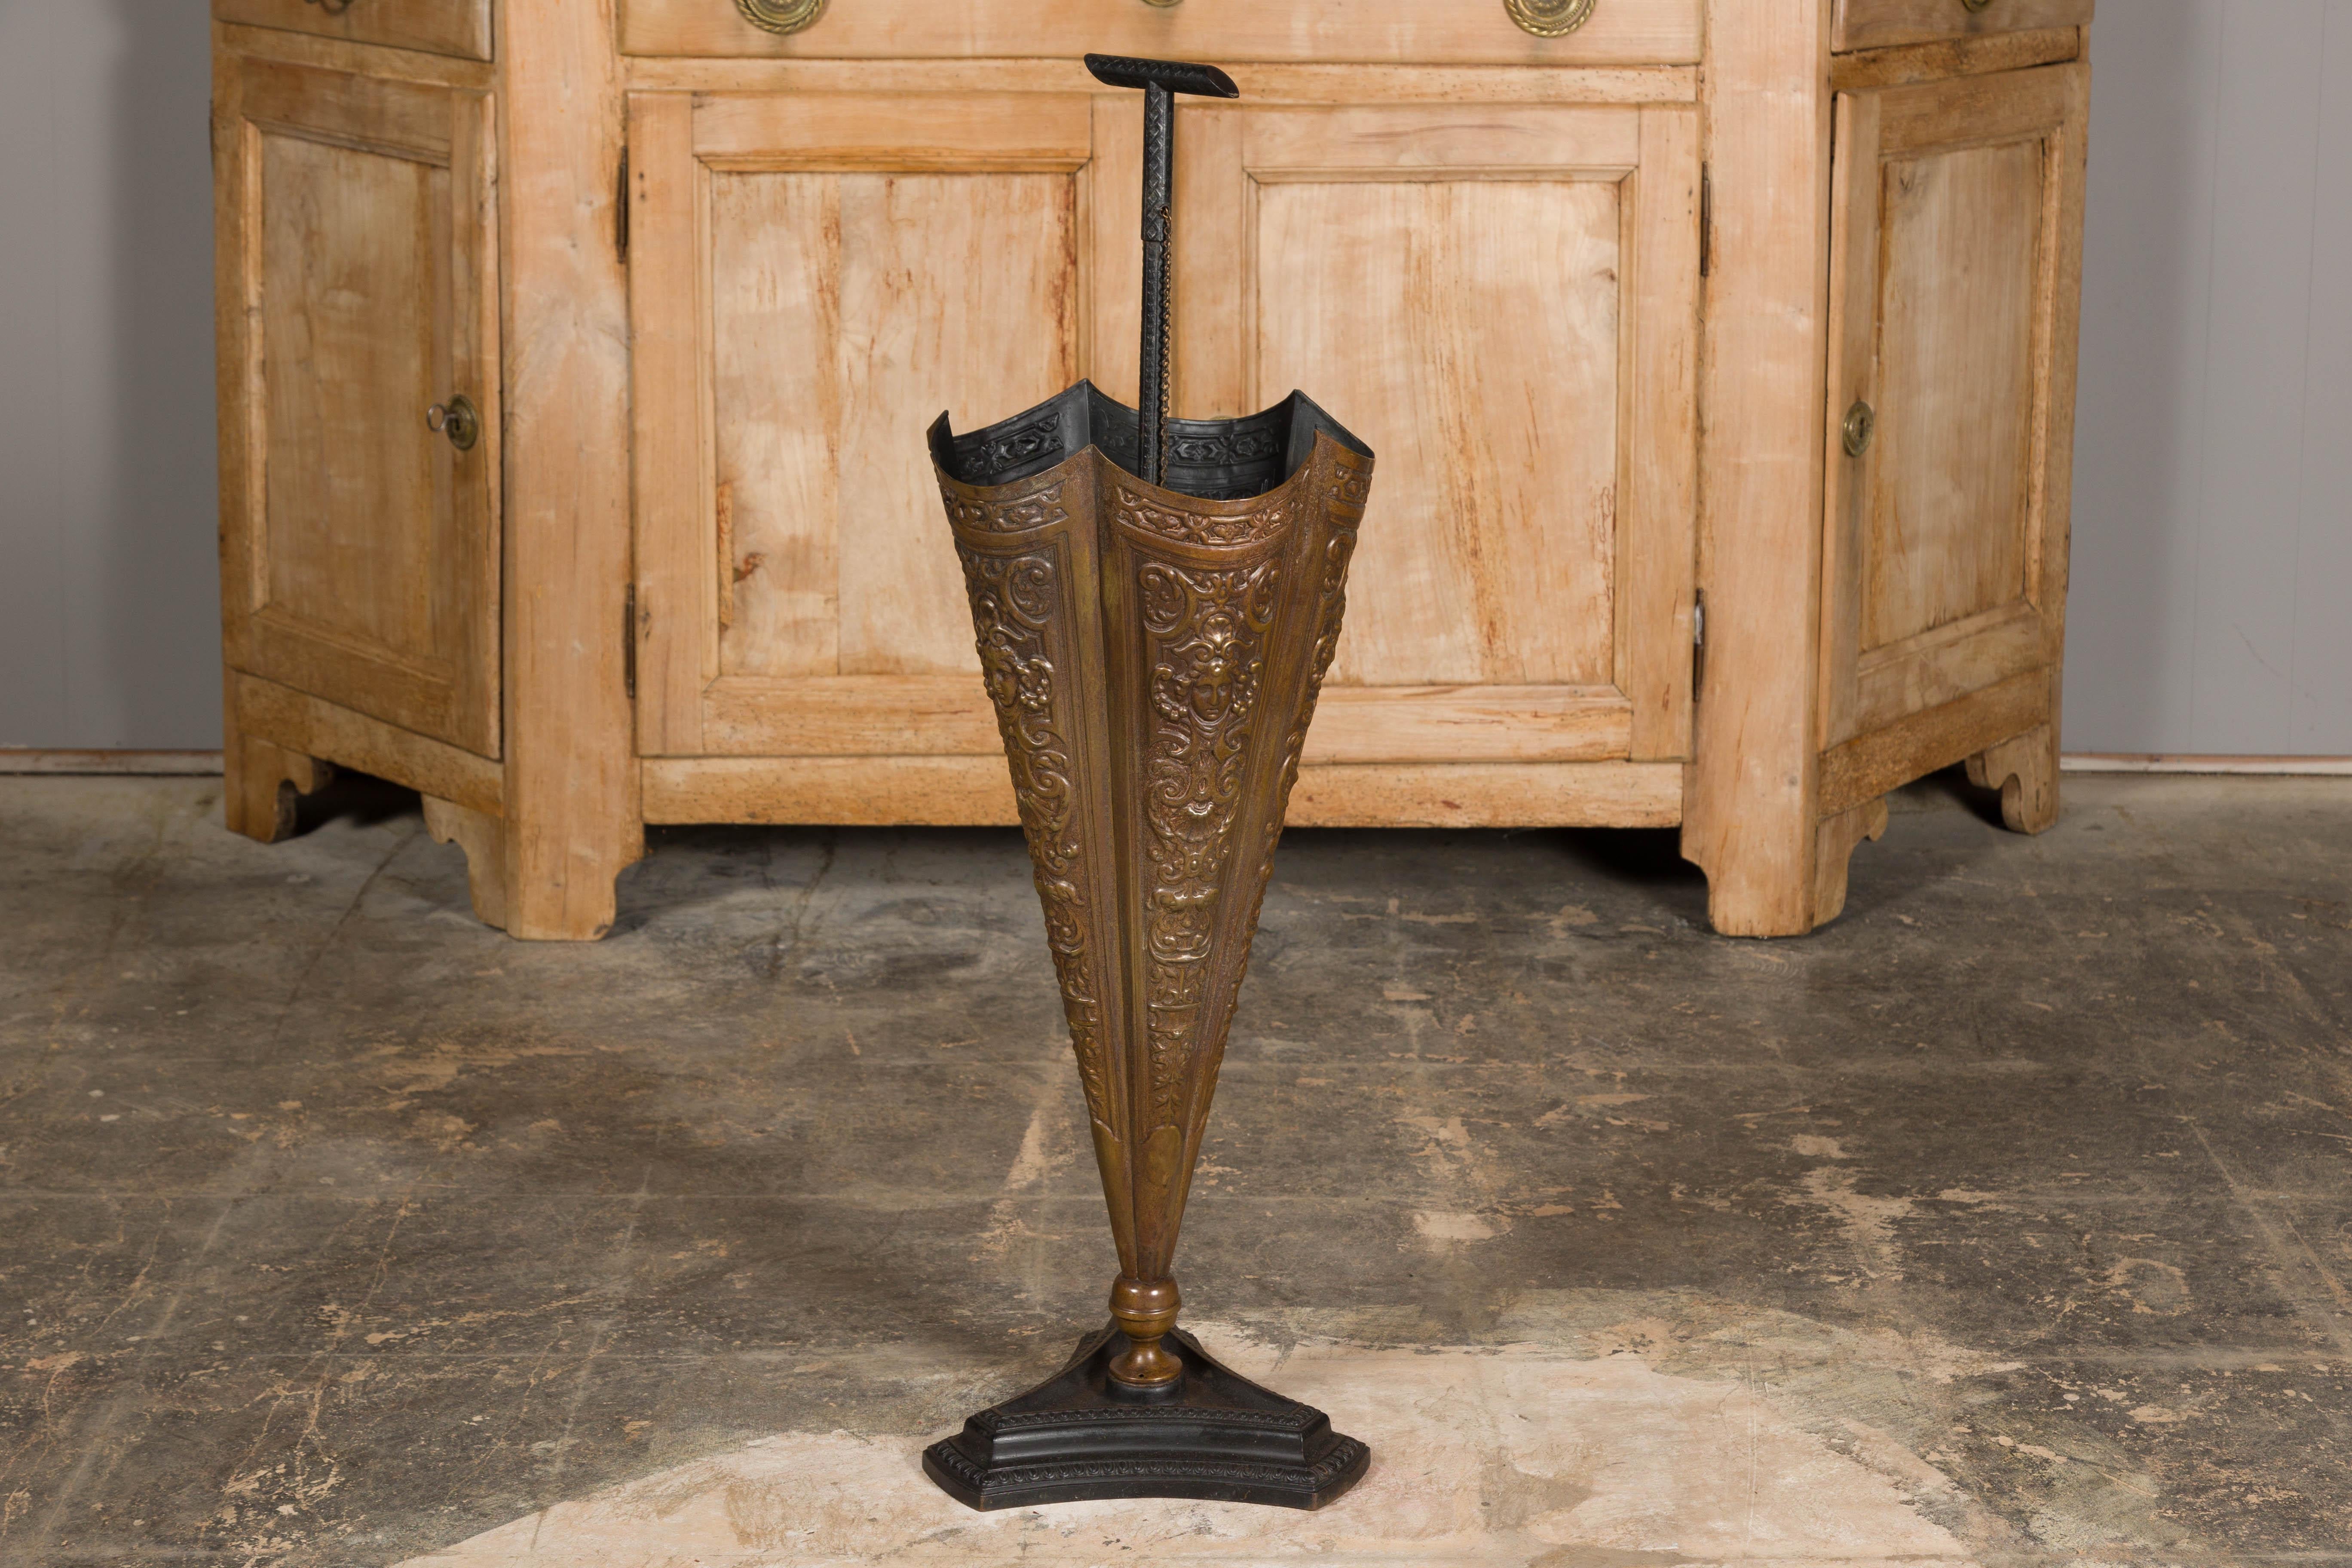 English 1920-1930 Brass Umbrella Stand with Raised Motifs and Tripartite Base For Sale 6